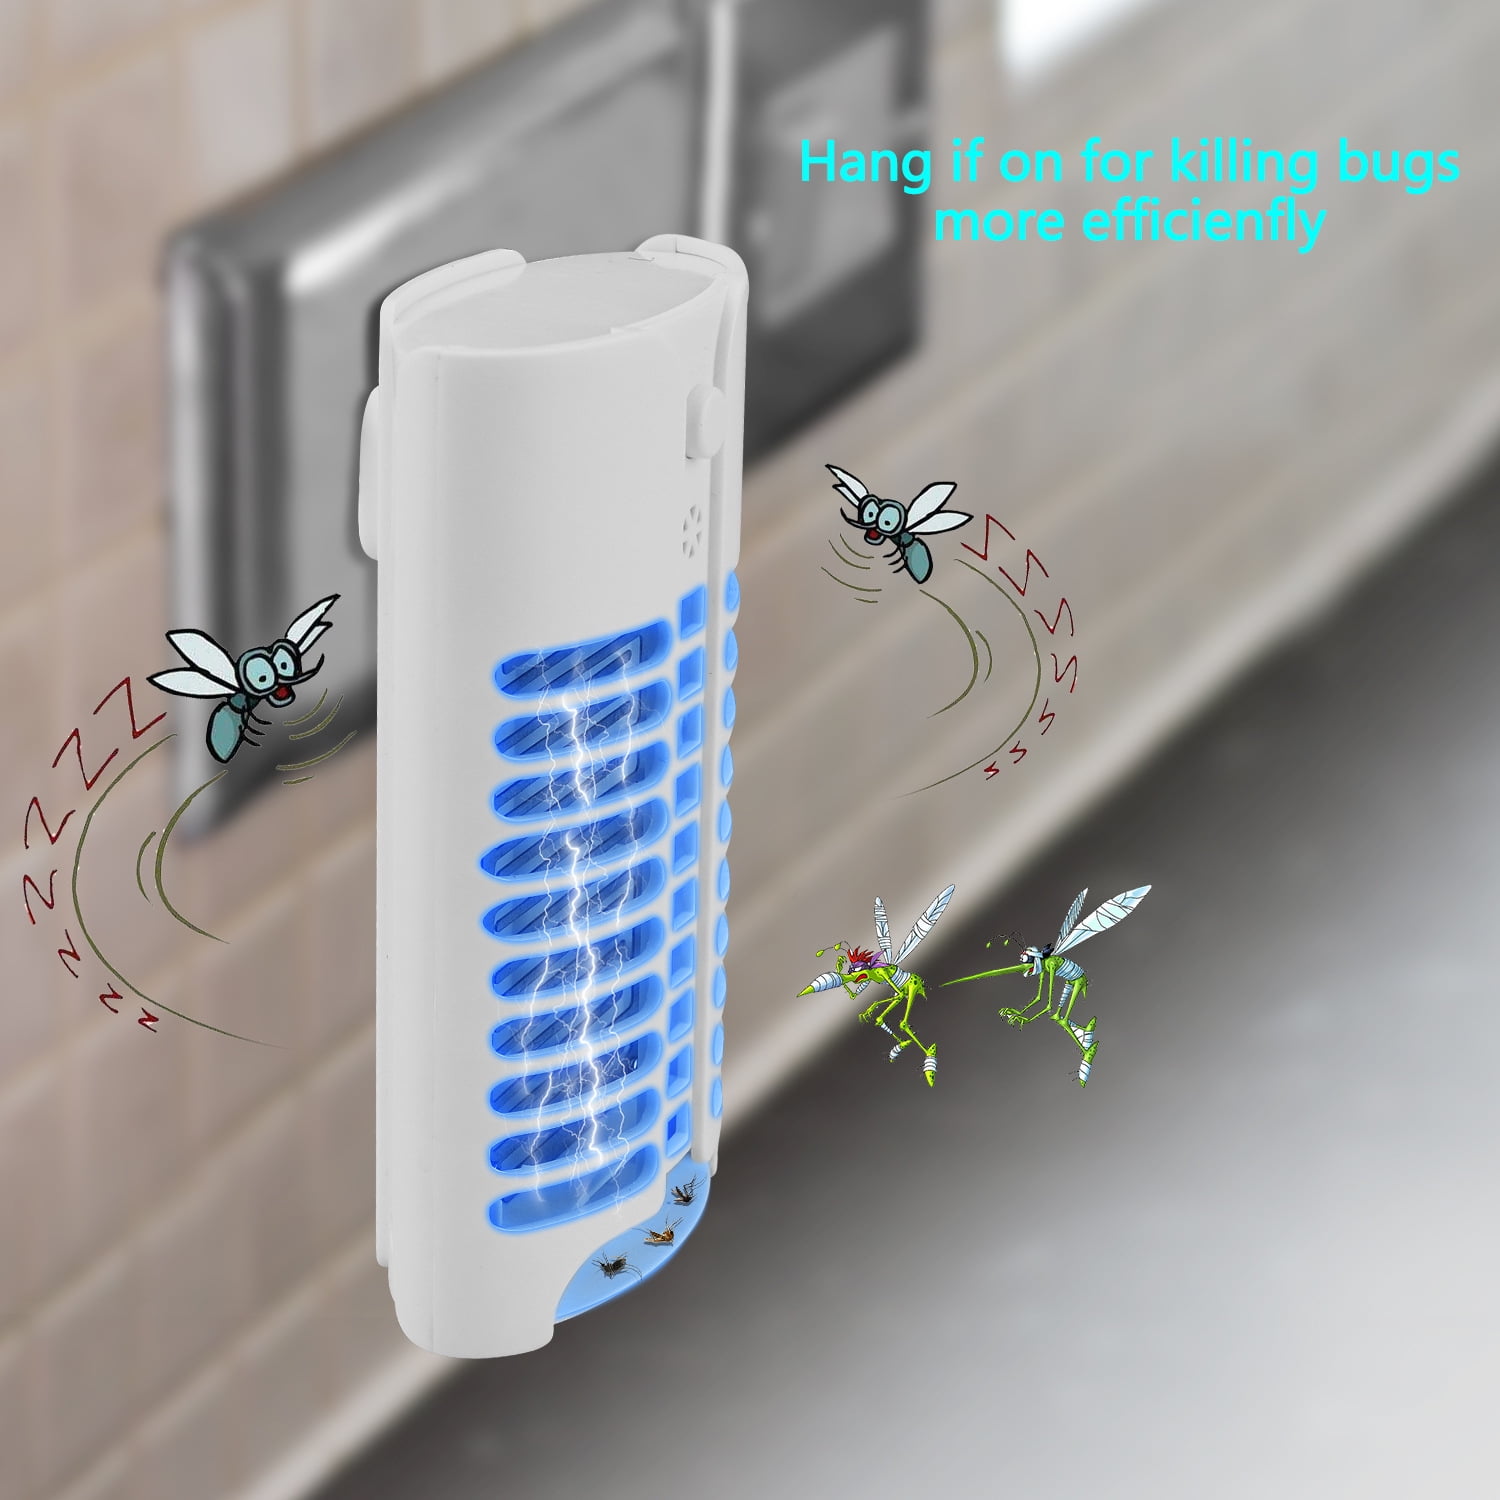 Electric Plug-in Lamp Pest Control for Gnat & Mosquitoes,Indoor Bug